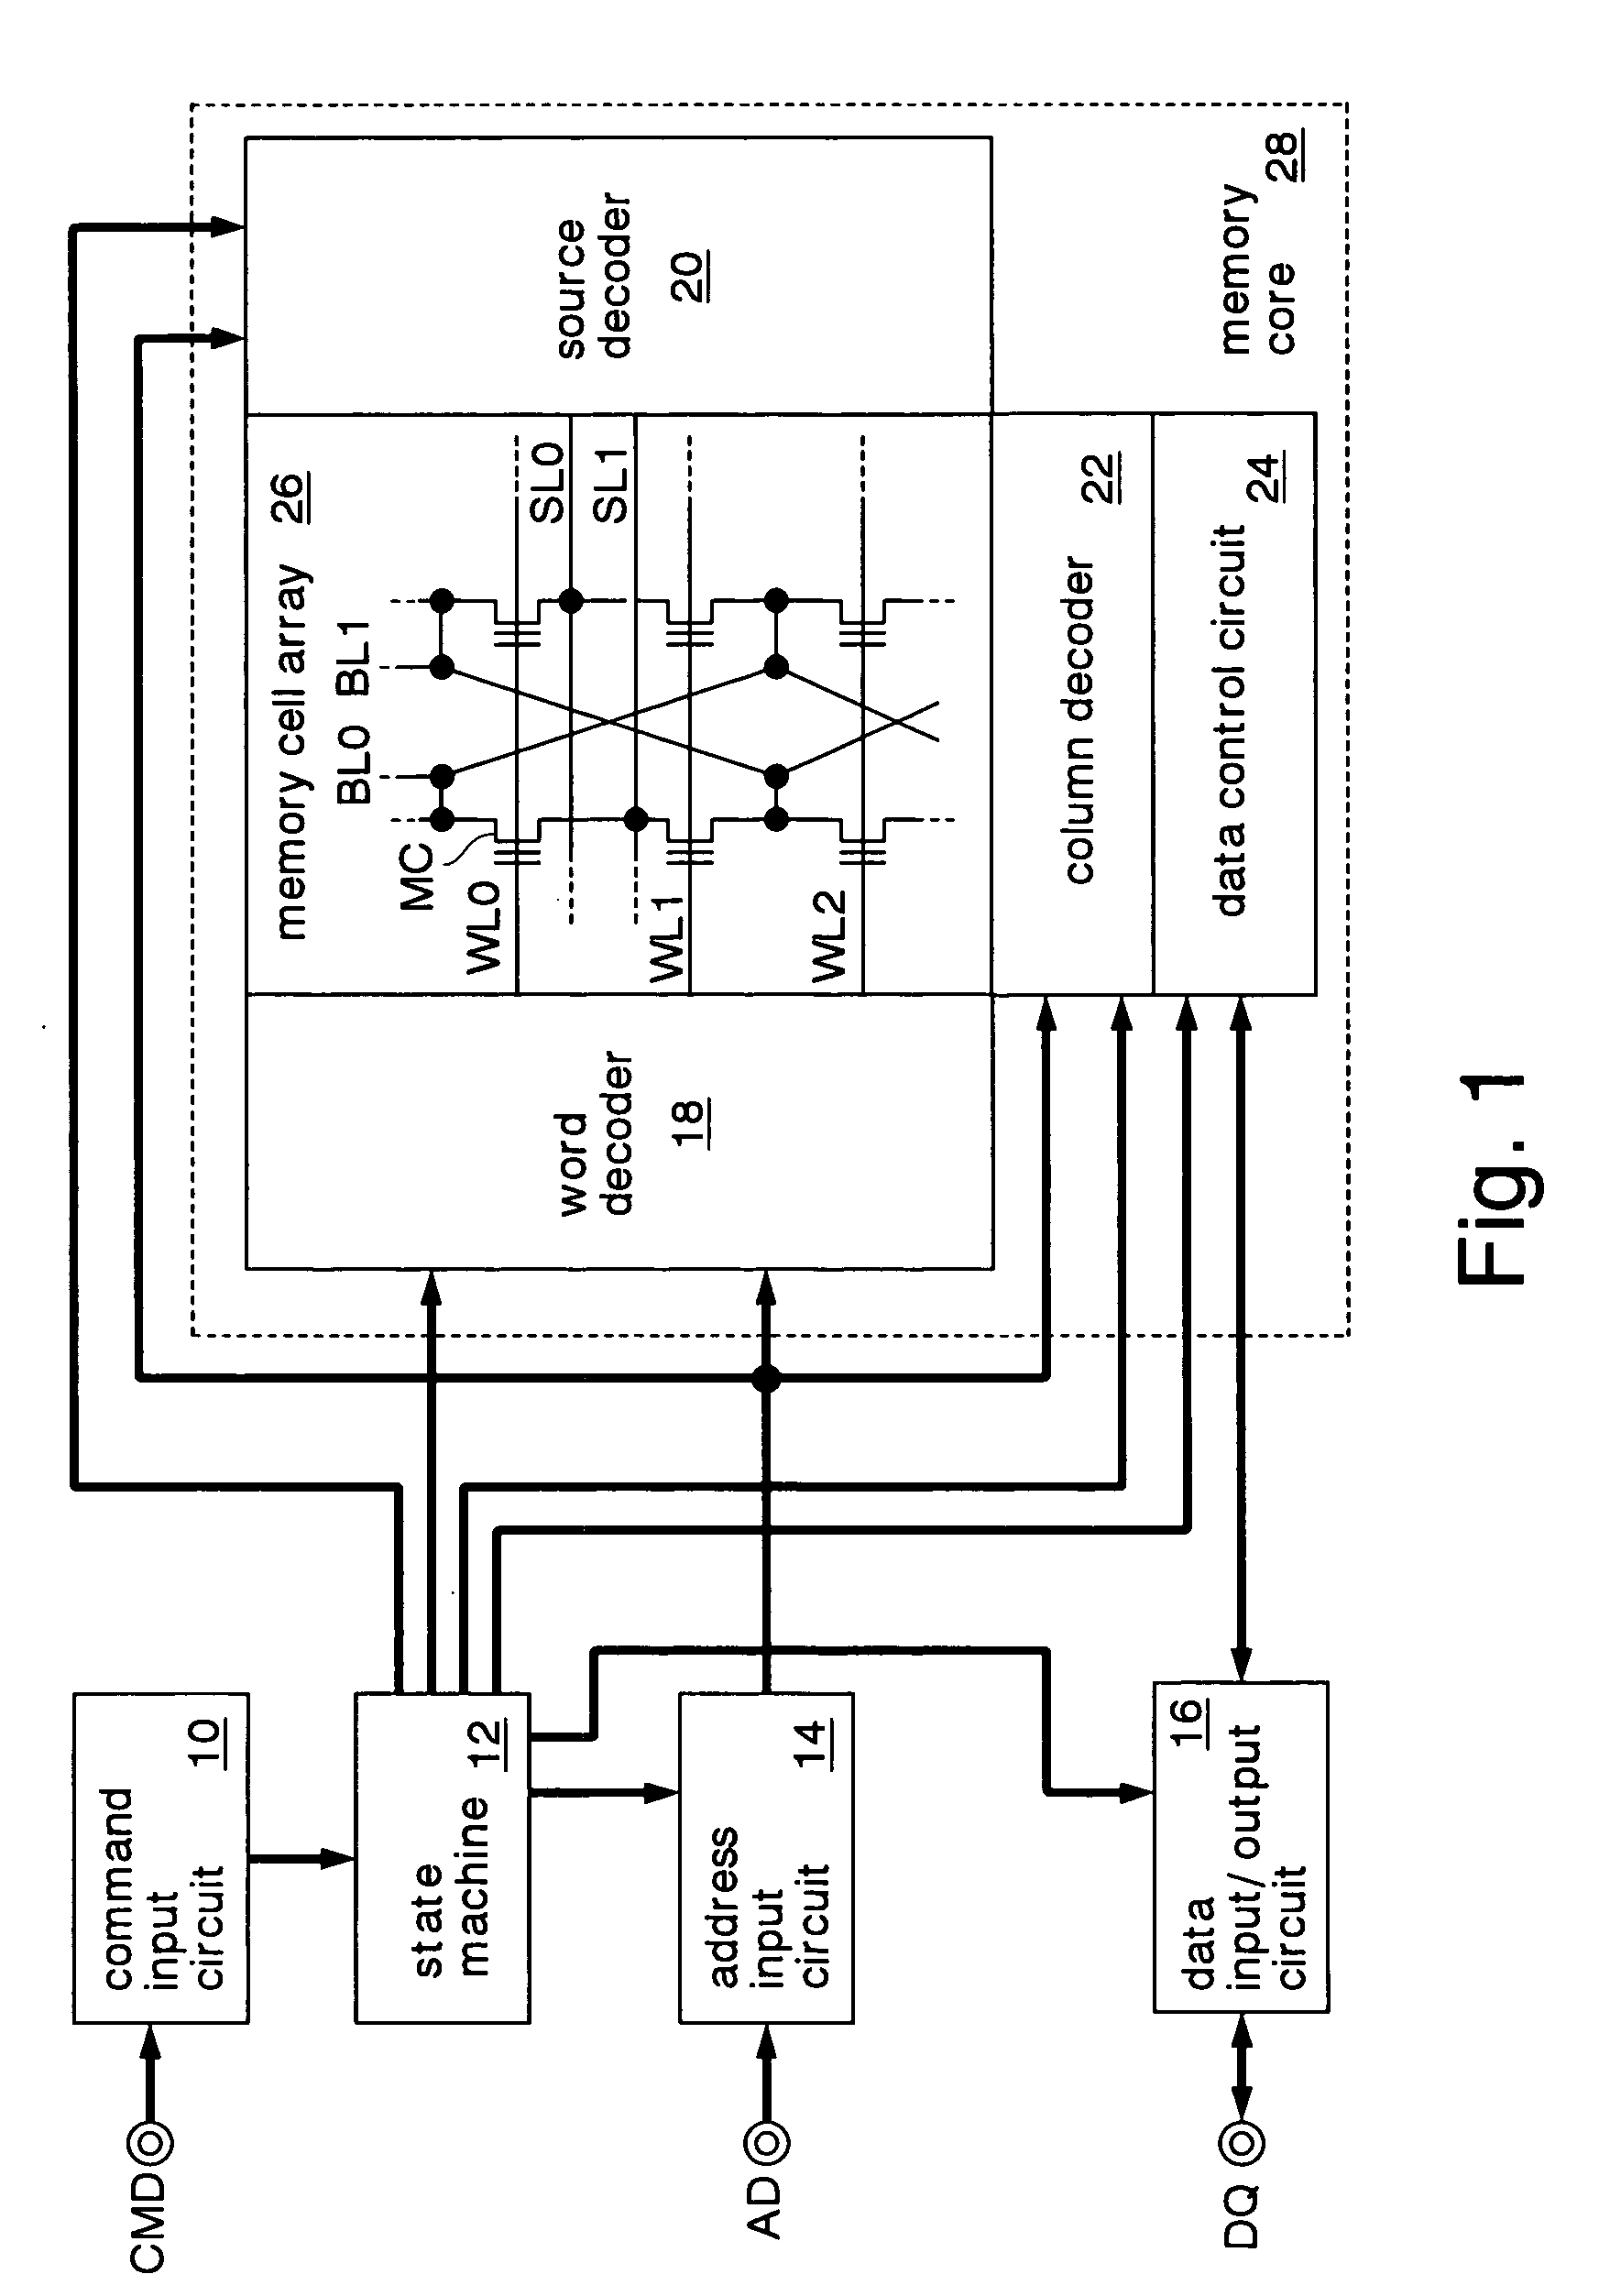 Nonvolatile memory cell array architecture for high speed reading